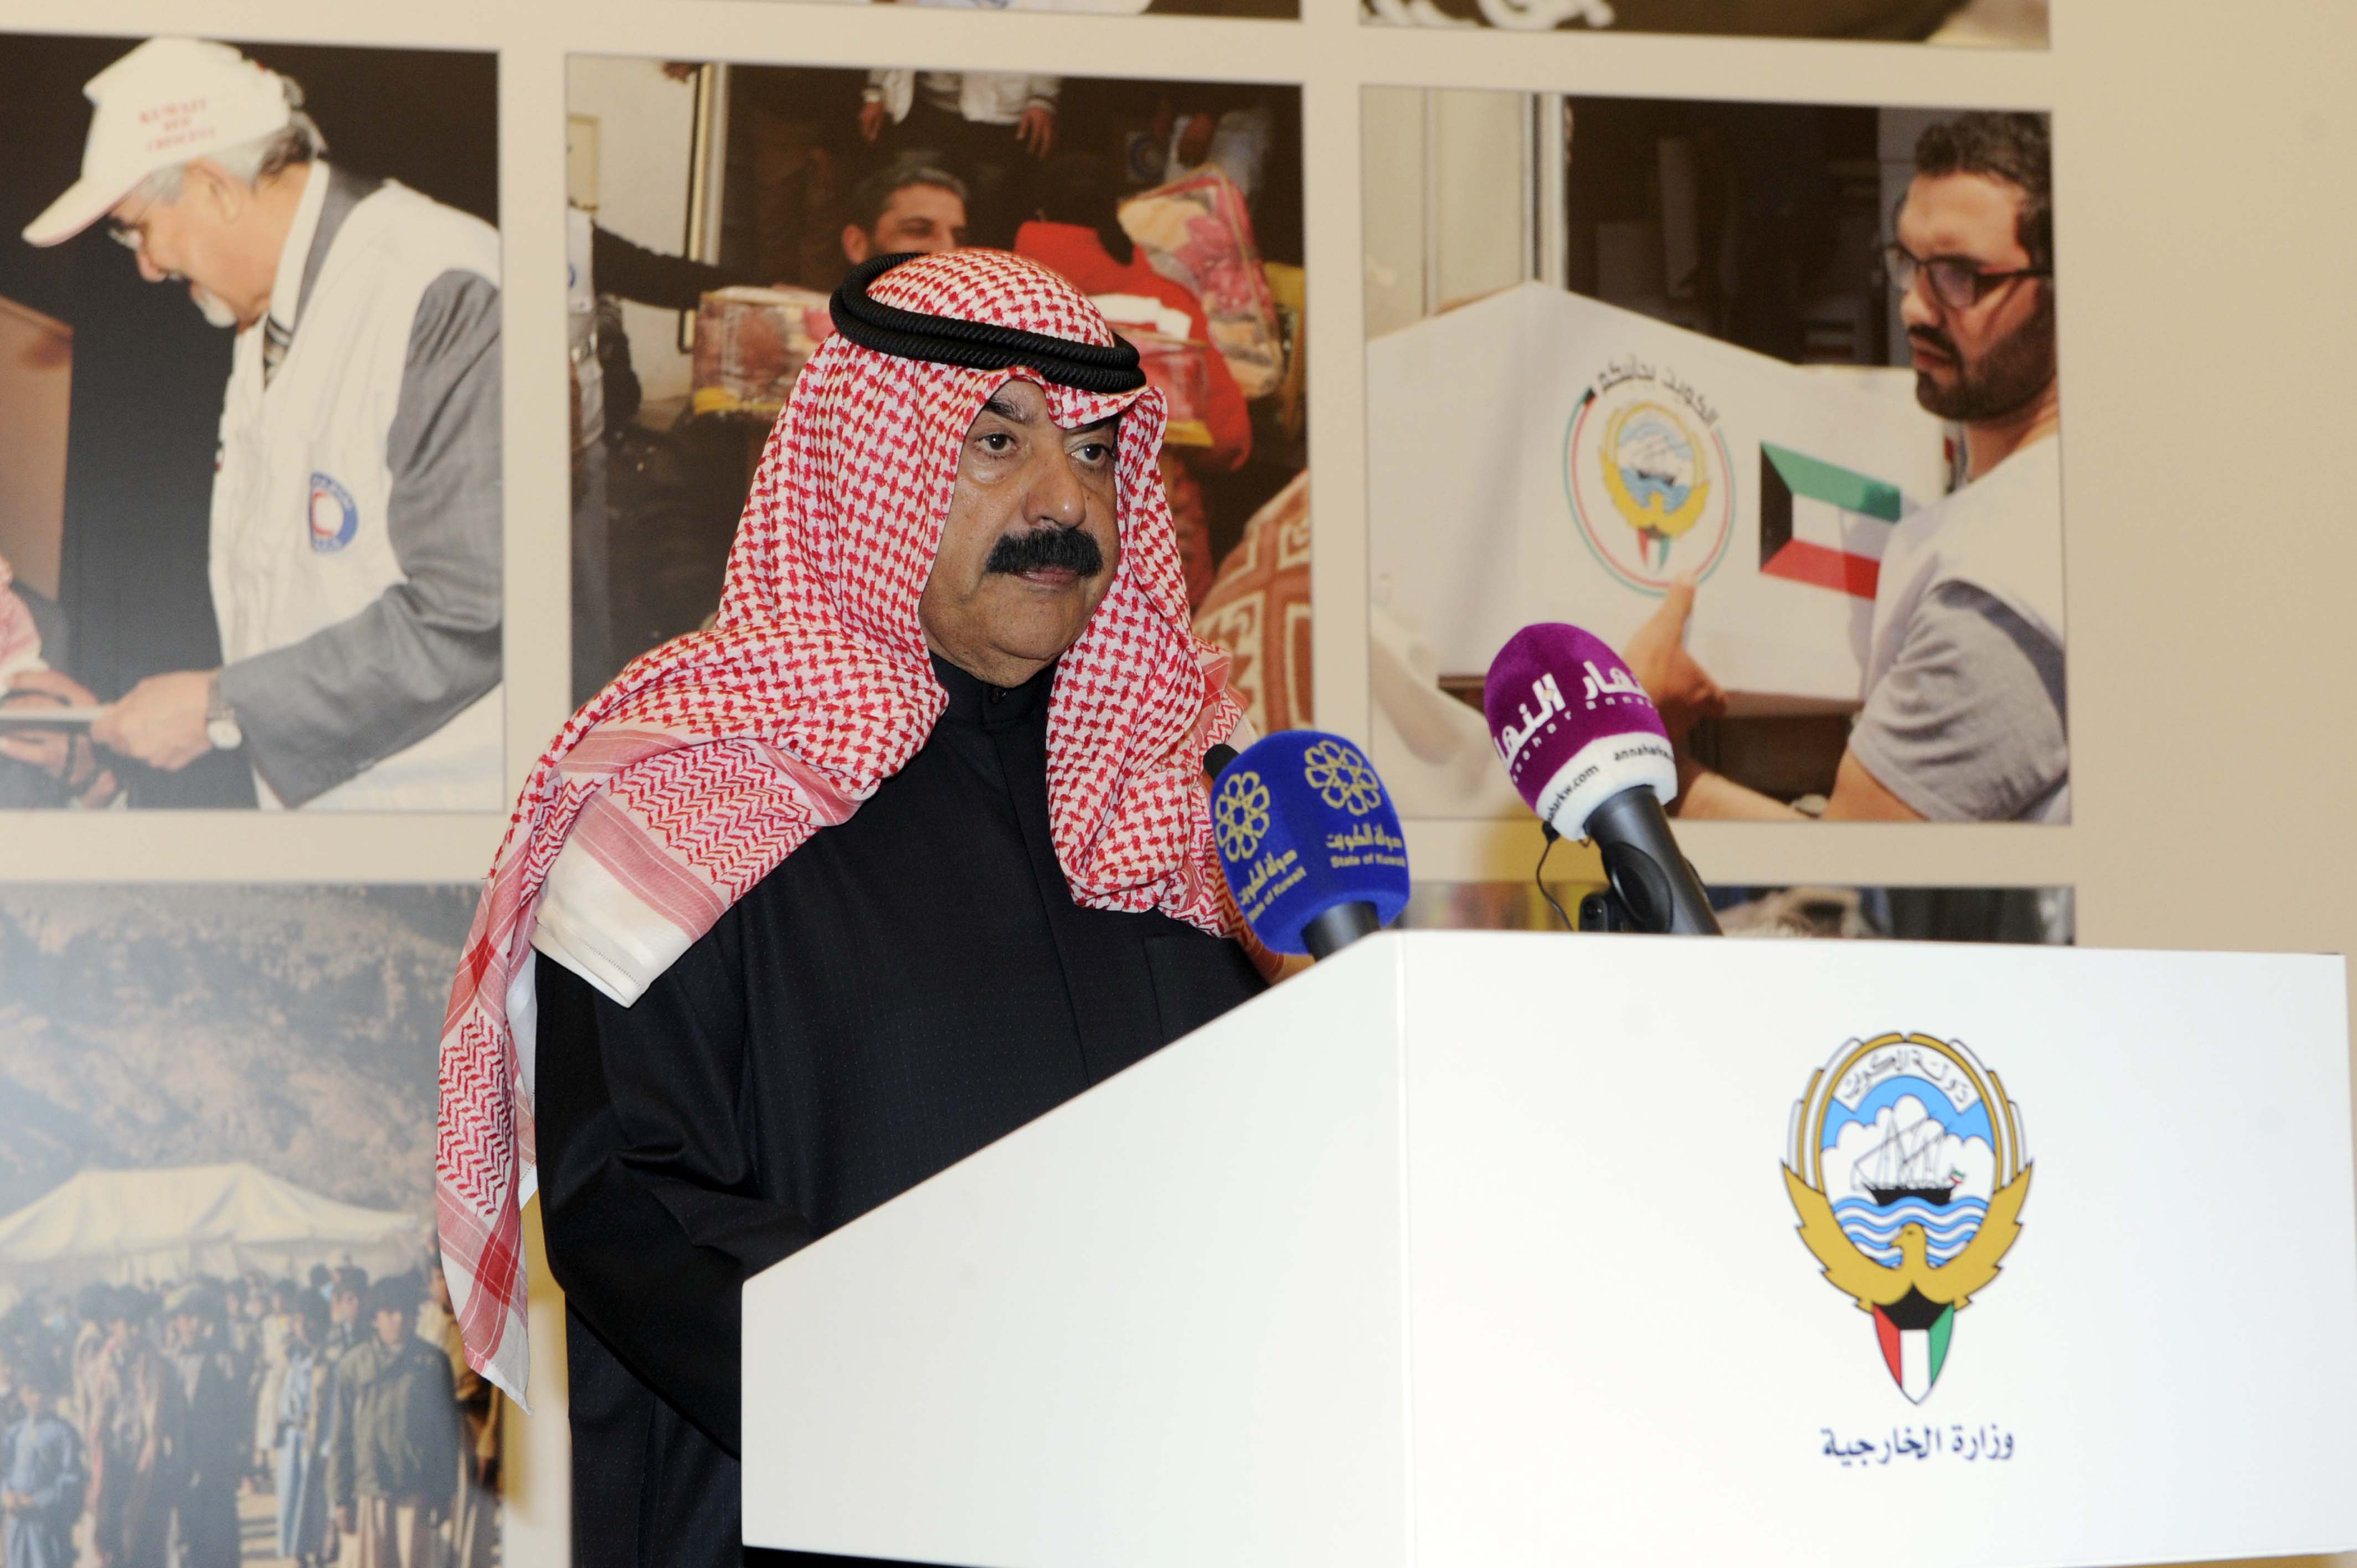 Al-Jarallah said in his opening speech at the ninth seminar on Kuwait's humanitarian work, organized by the Ministry of Foreign Affairs